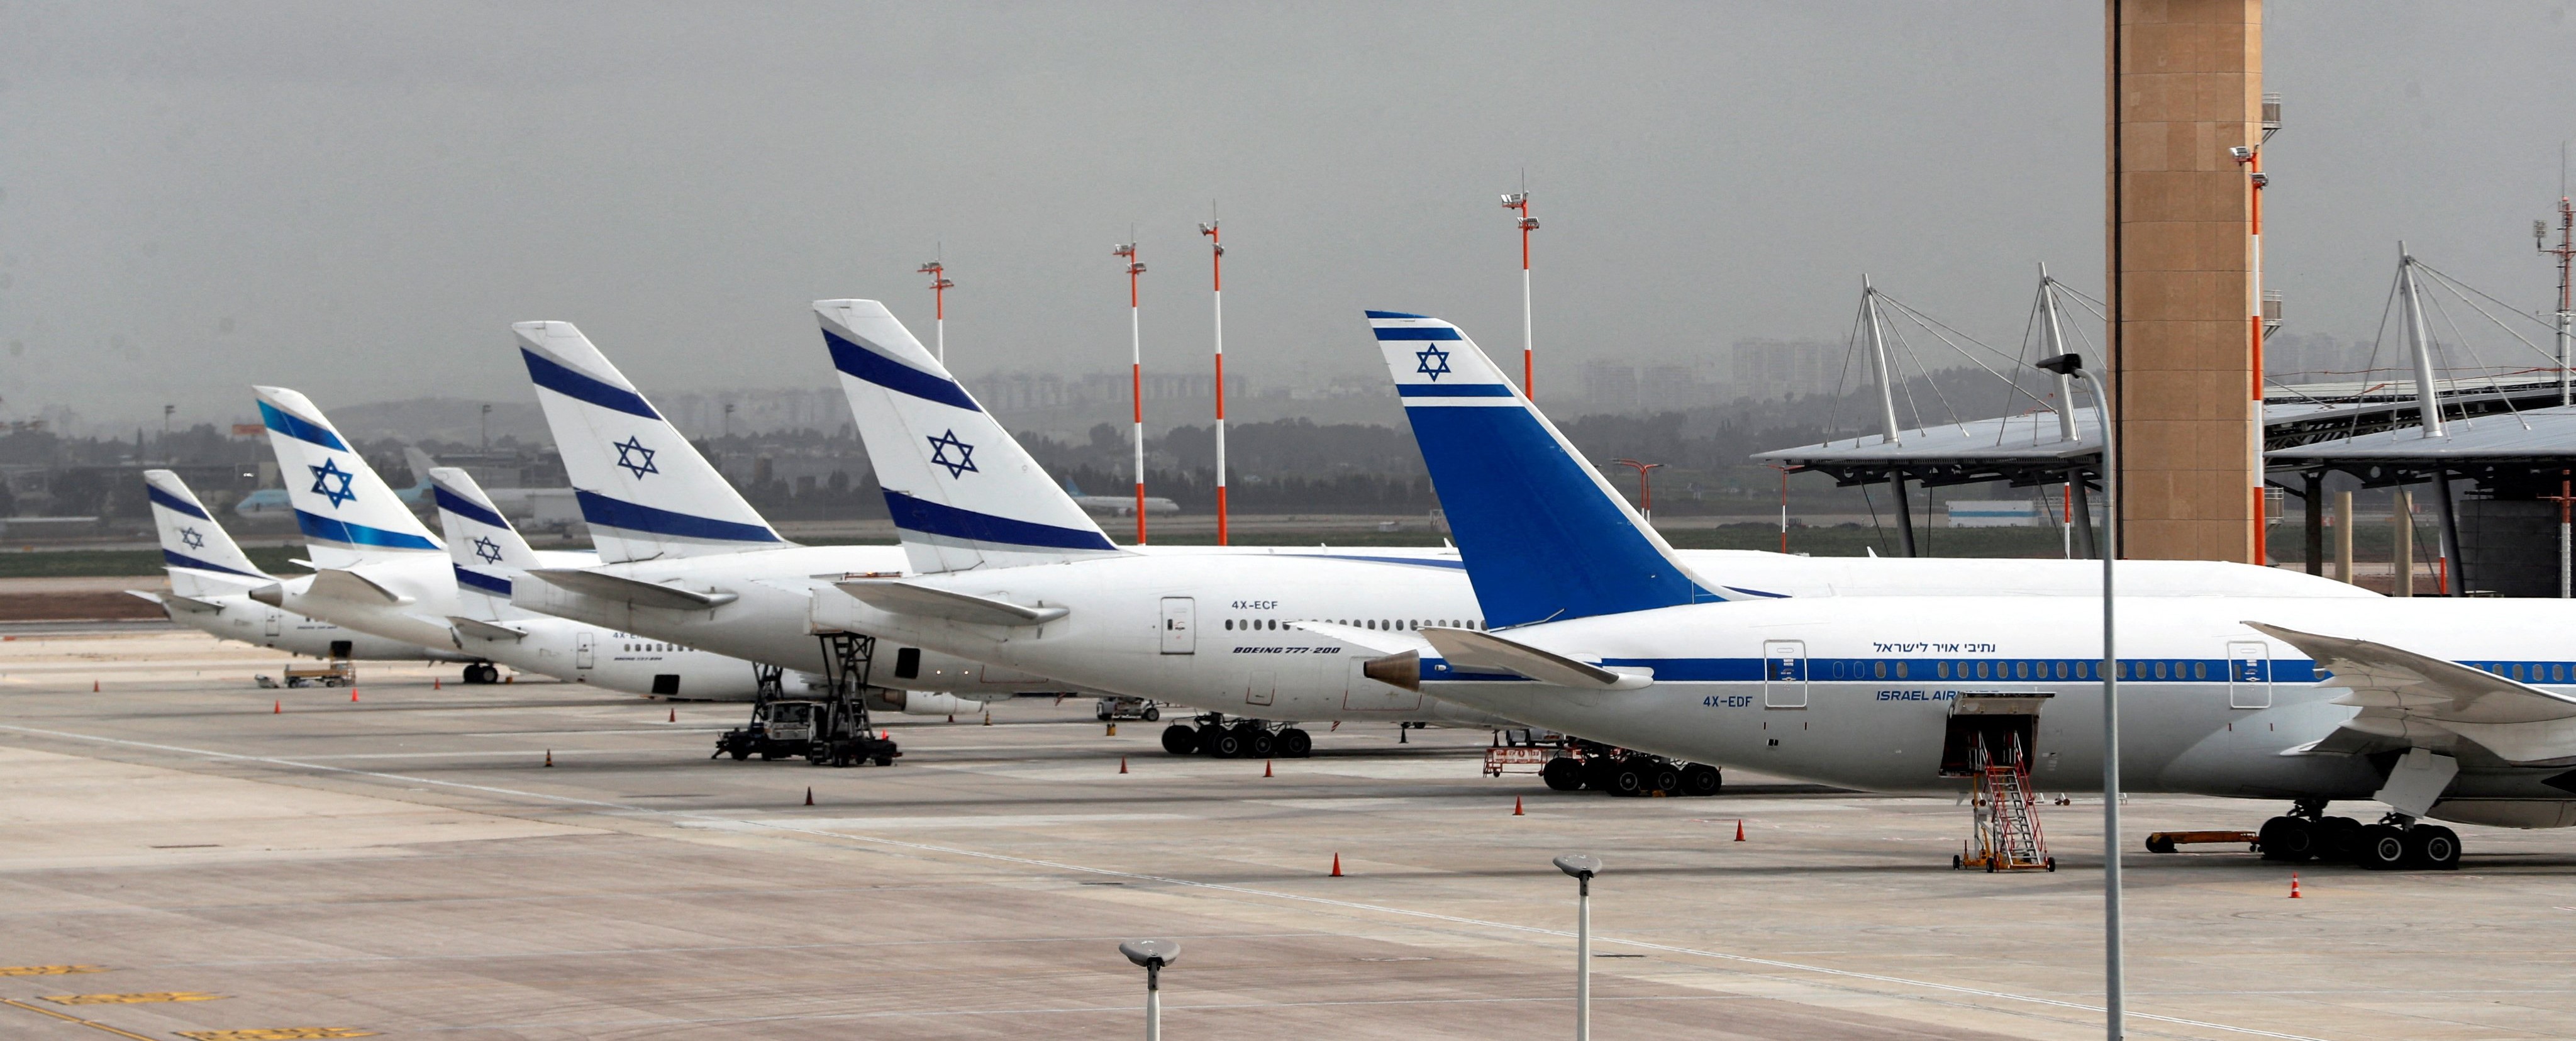 Aviation war Insurers Canceled  Some Cover For  Lebanon and  Israel , Sent  Notices  to  Carriers.